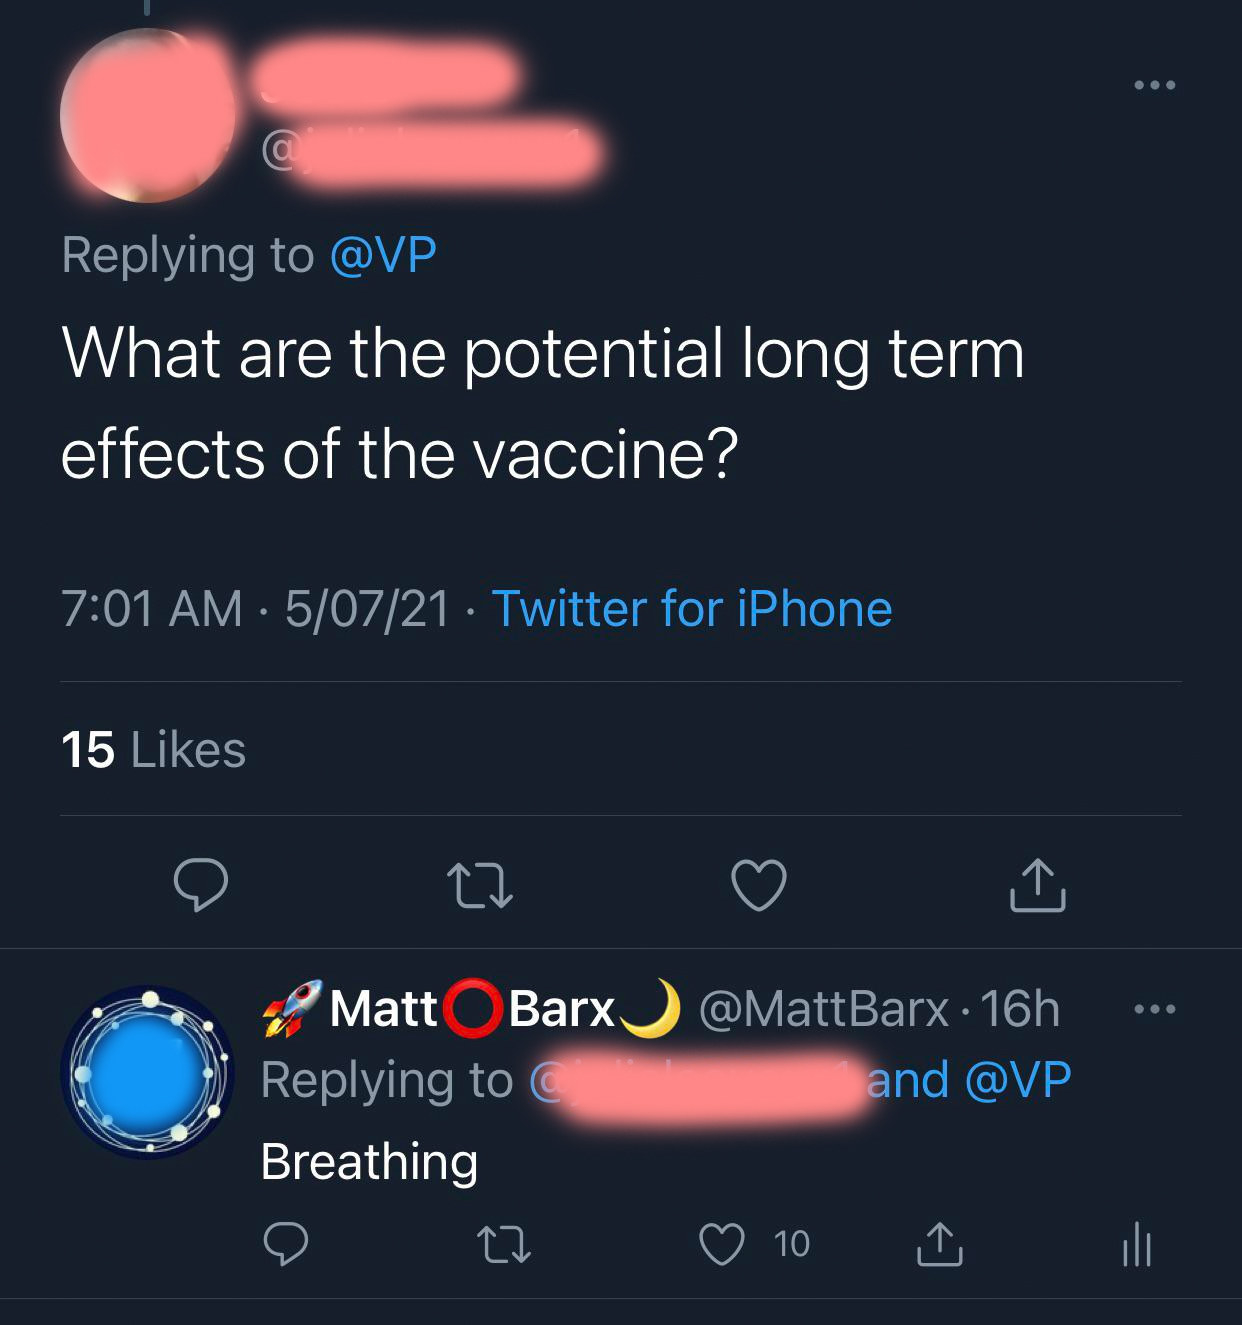 Person who asks what are the long-term effects of the vaccine is told, &quot;Breathing&quot;